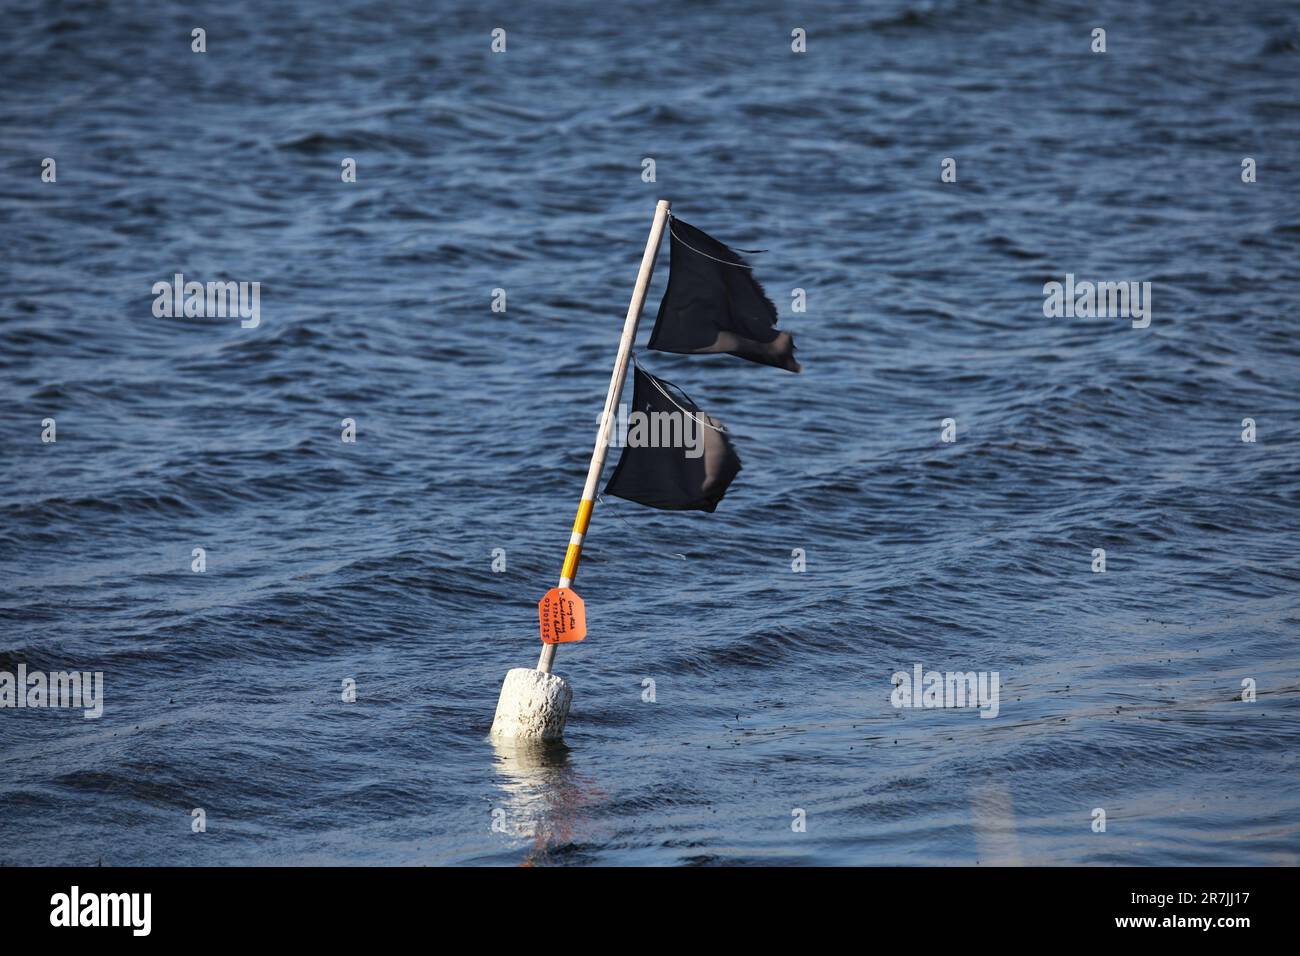 https://c8.alamy.com/comp/2R7JJ17/a-buoy-with-two-torn-black-flags-floating-in-the-calm-waters-of-a-lake-or-river-2R7JJ17.jpg